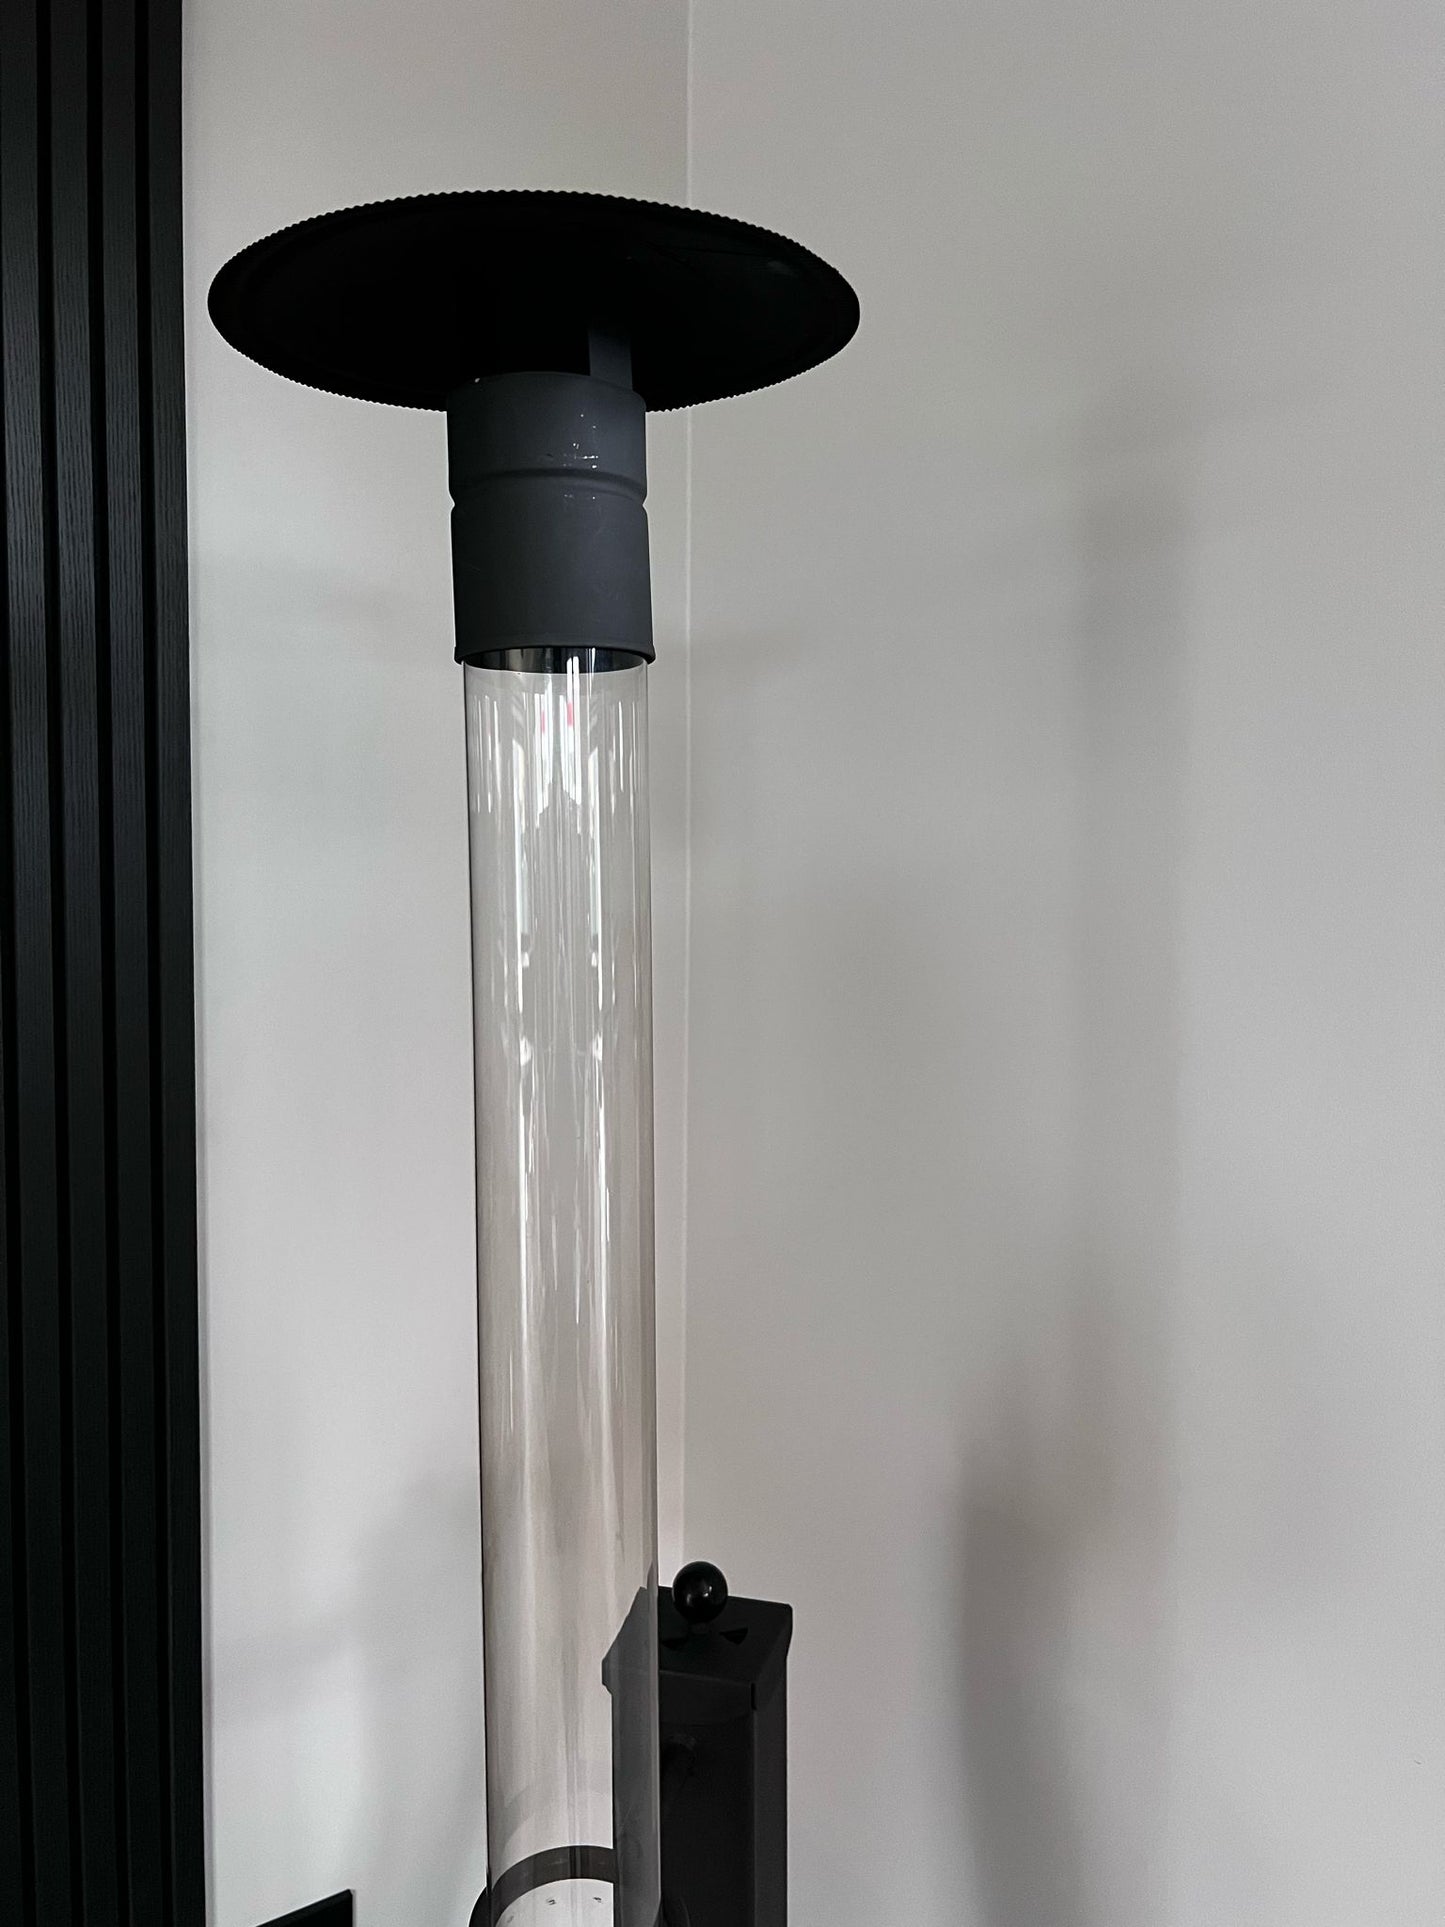 KN Torch - Environmentally friendly heating for indoors and outdoors